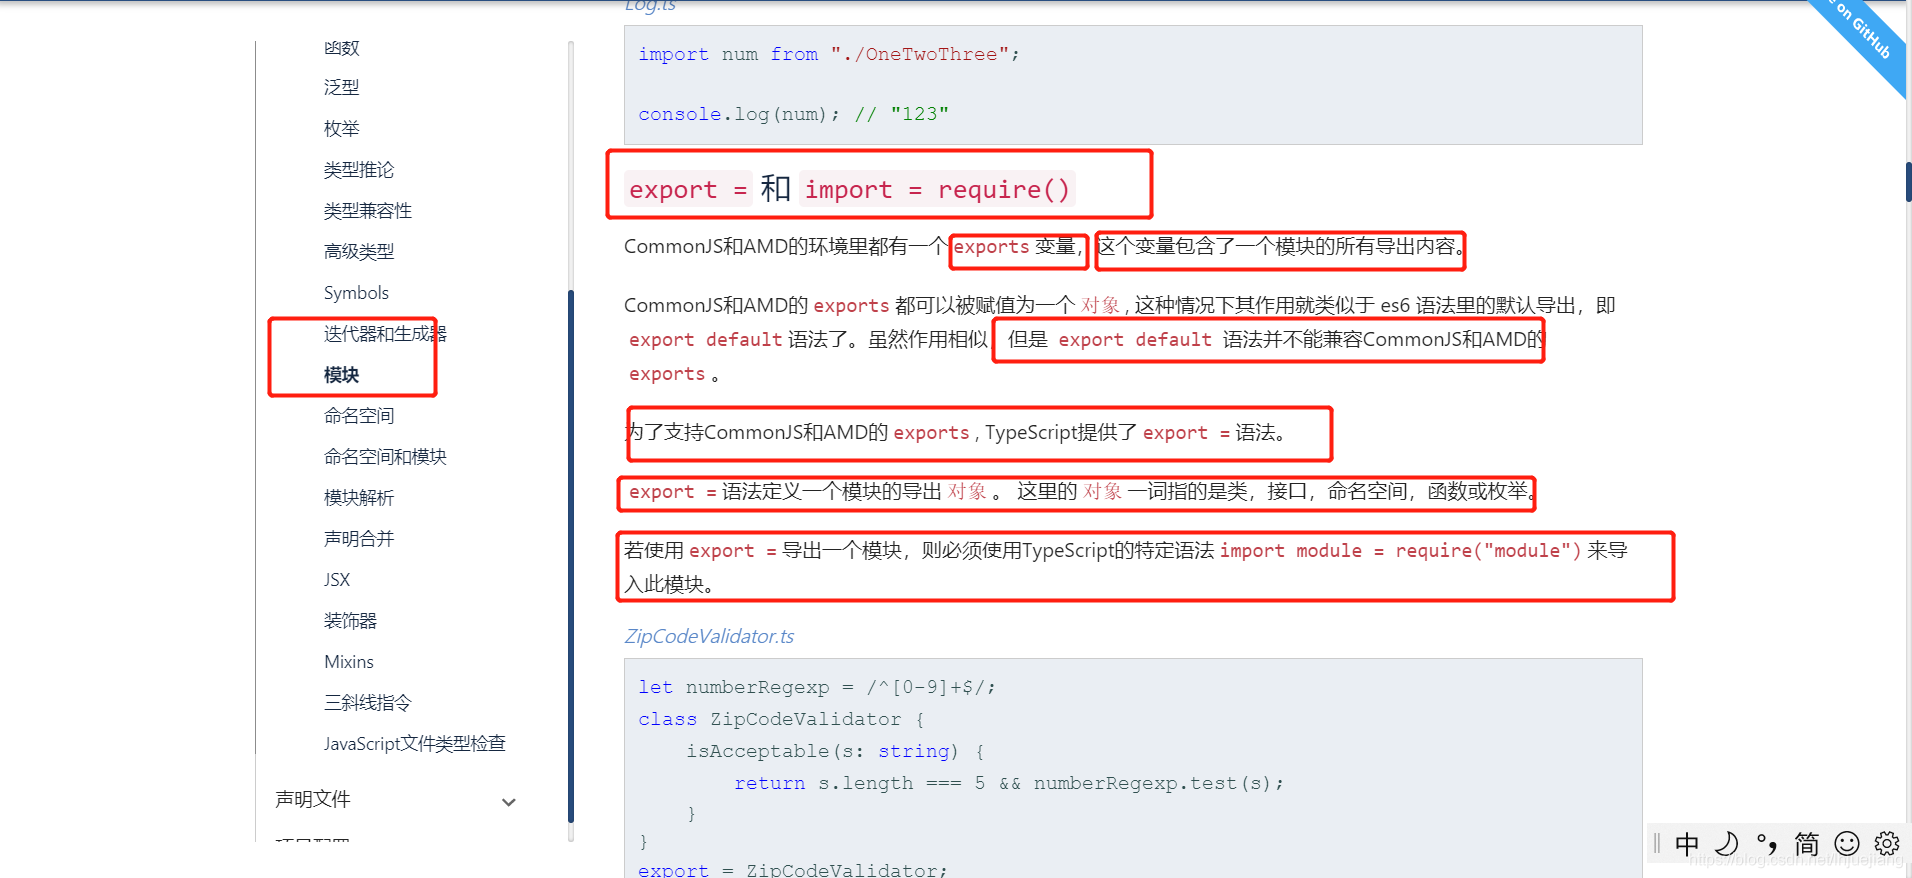 [import ... from」、「 import ... = require()」 和 「import(path: string)」有什么区别？